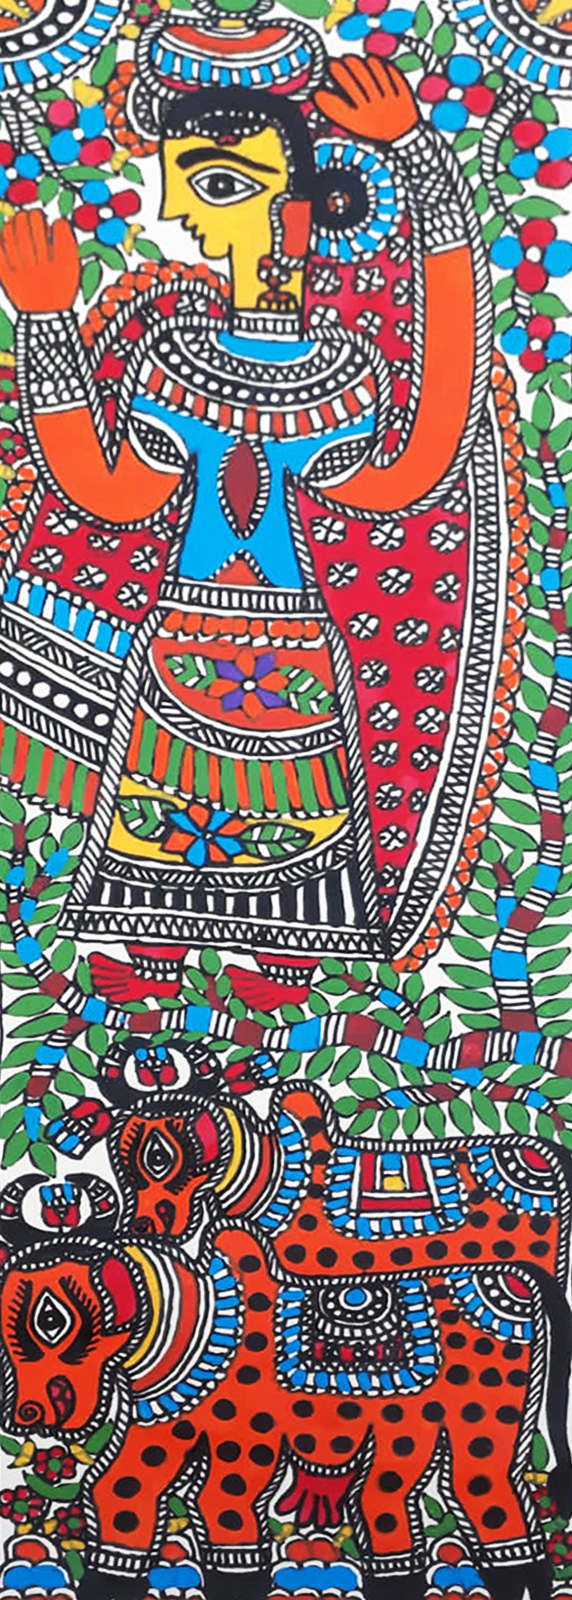 Buy The Gopi and the Cows in Madhubani 